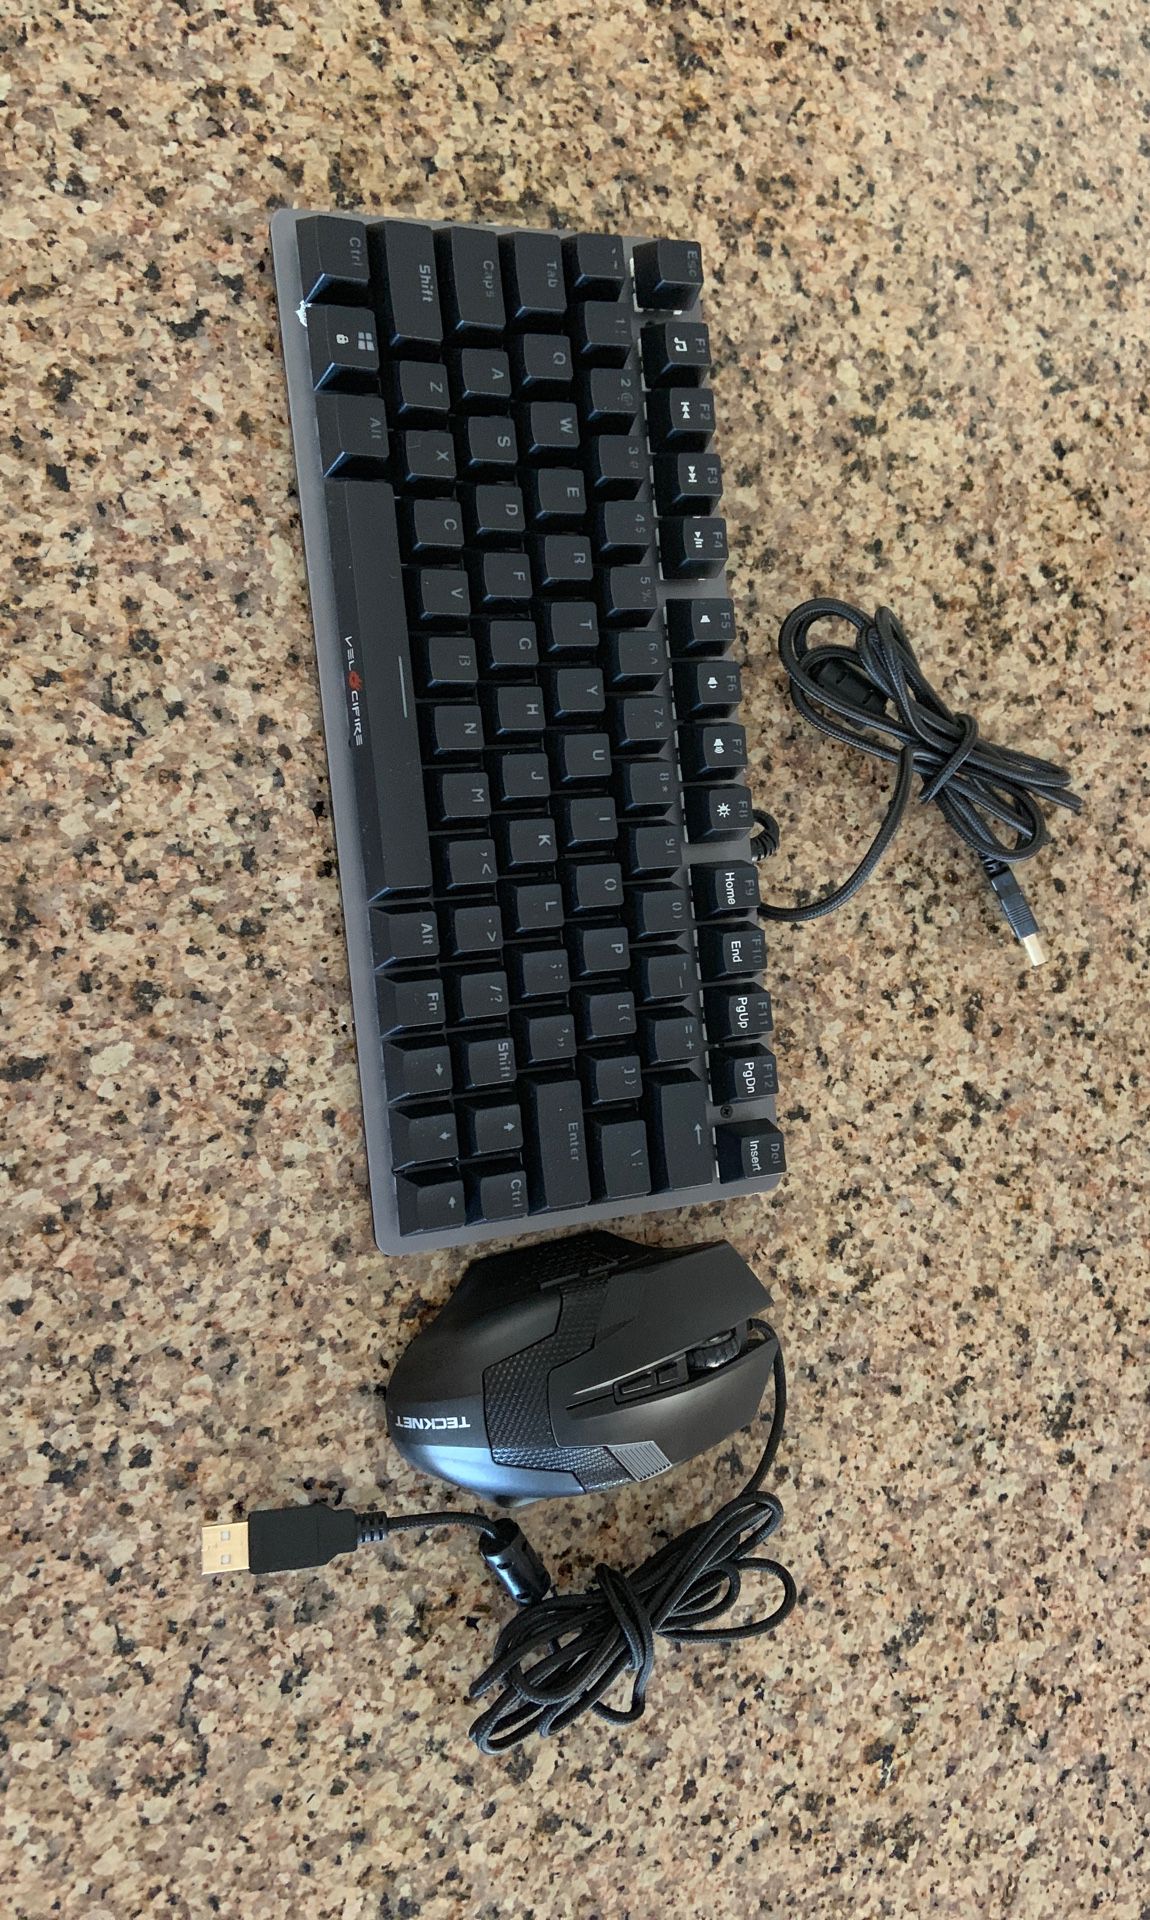 Mechanical gaming keyboard and mouse